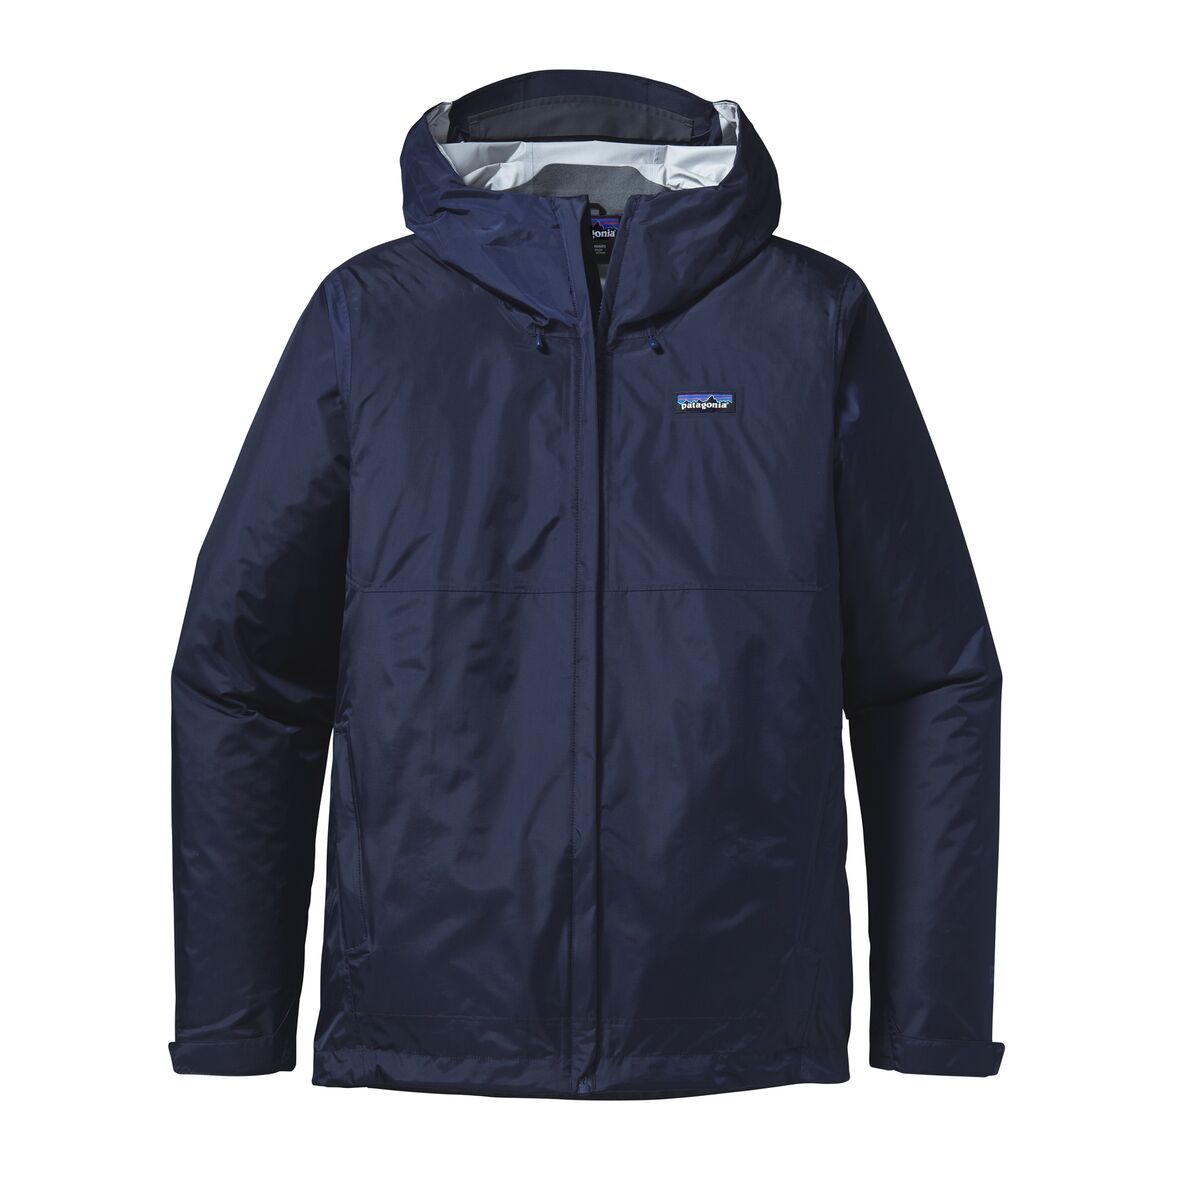 Patagonia - Torrentshell - Chaqueta impermeable - Hombre